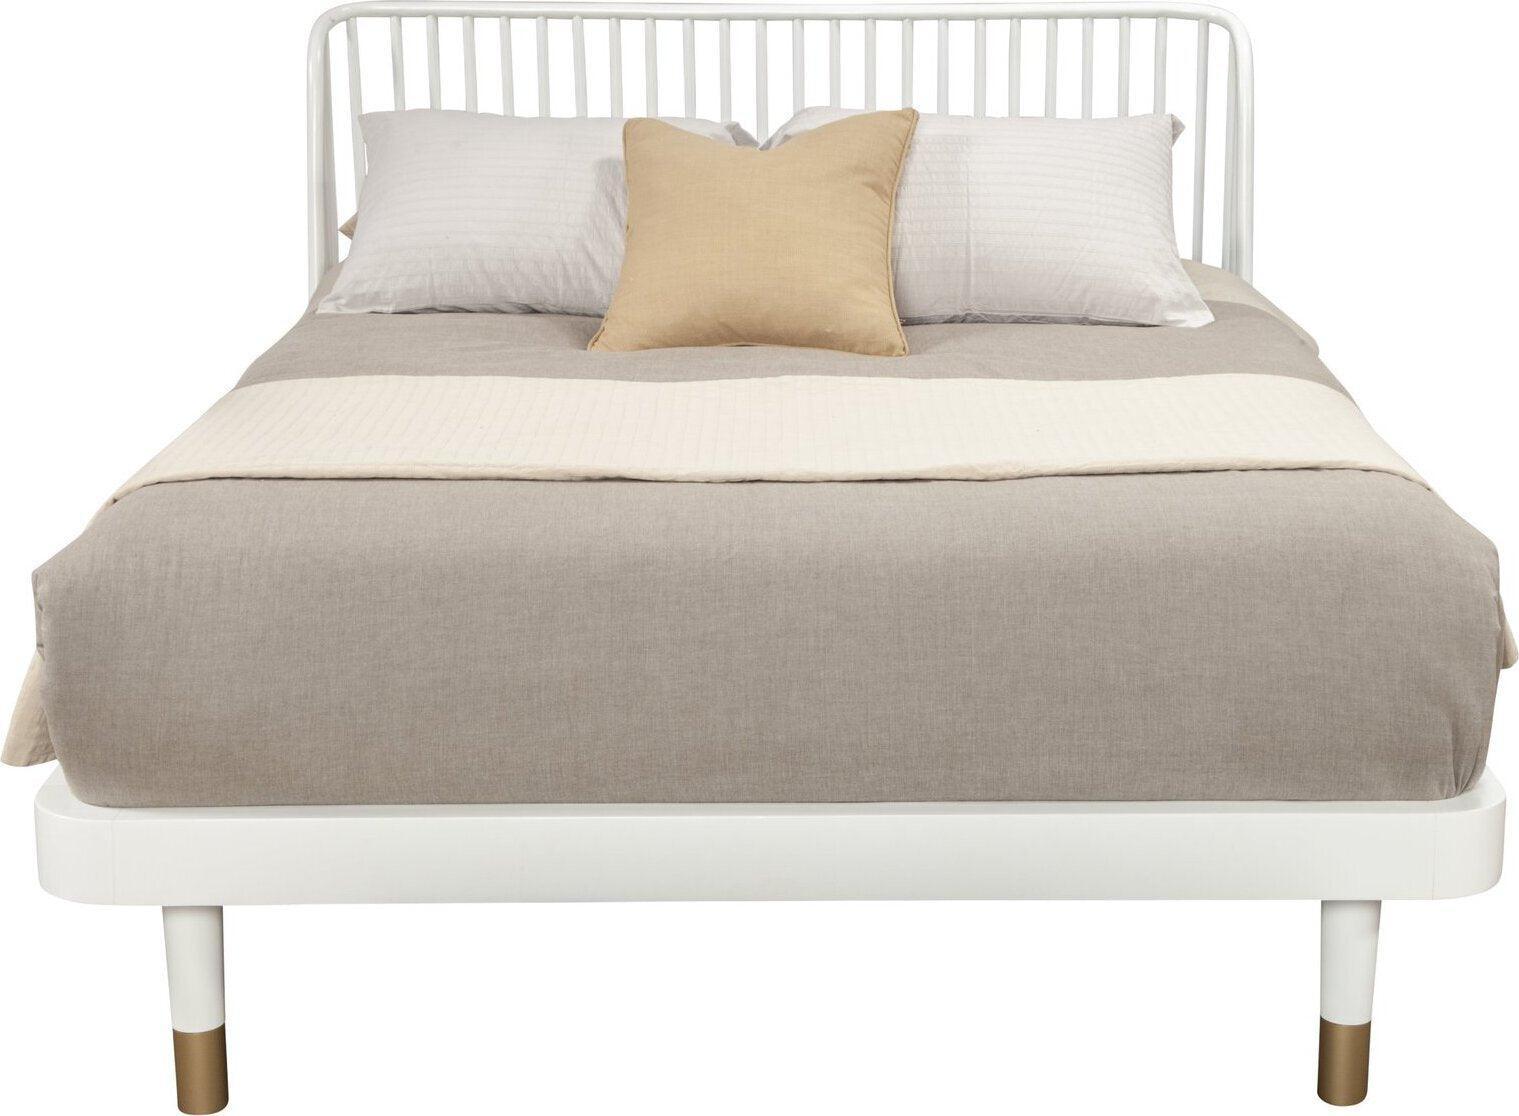 Alpine Furniture Beds - Madelyn California King Bed White